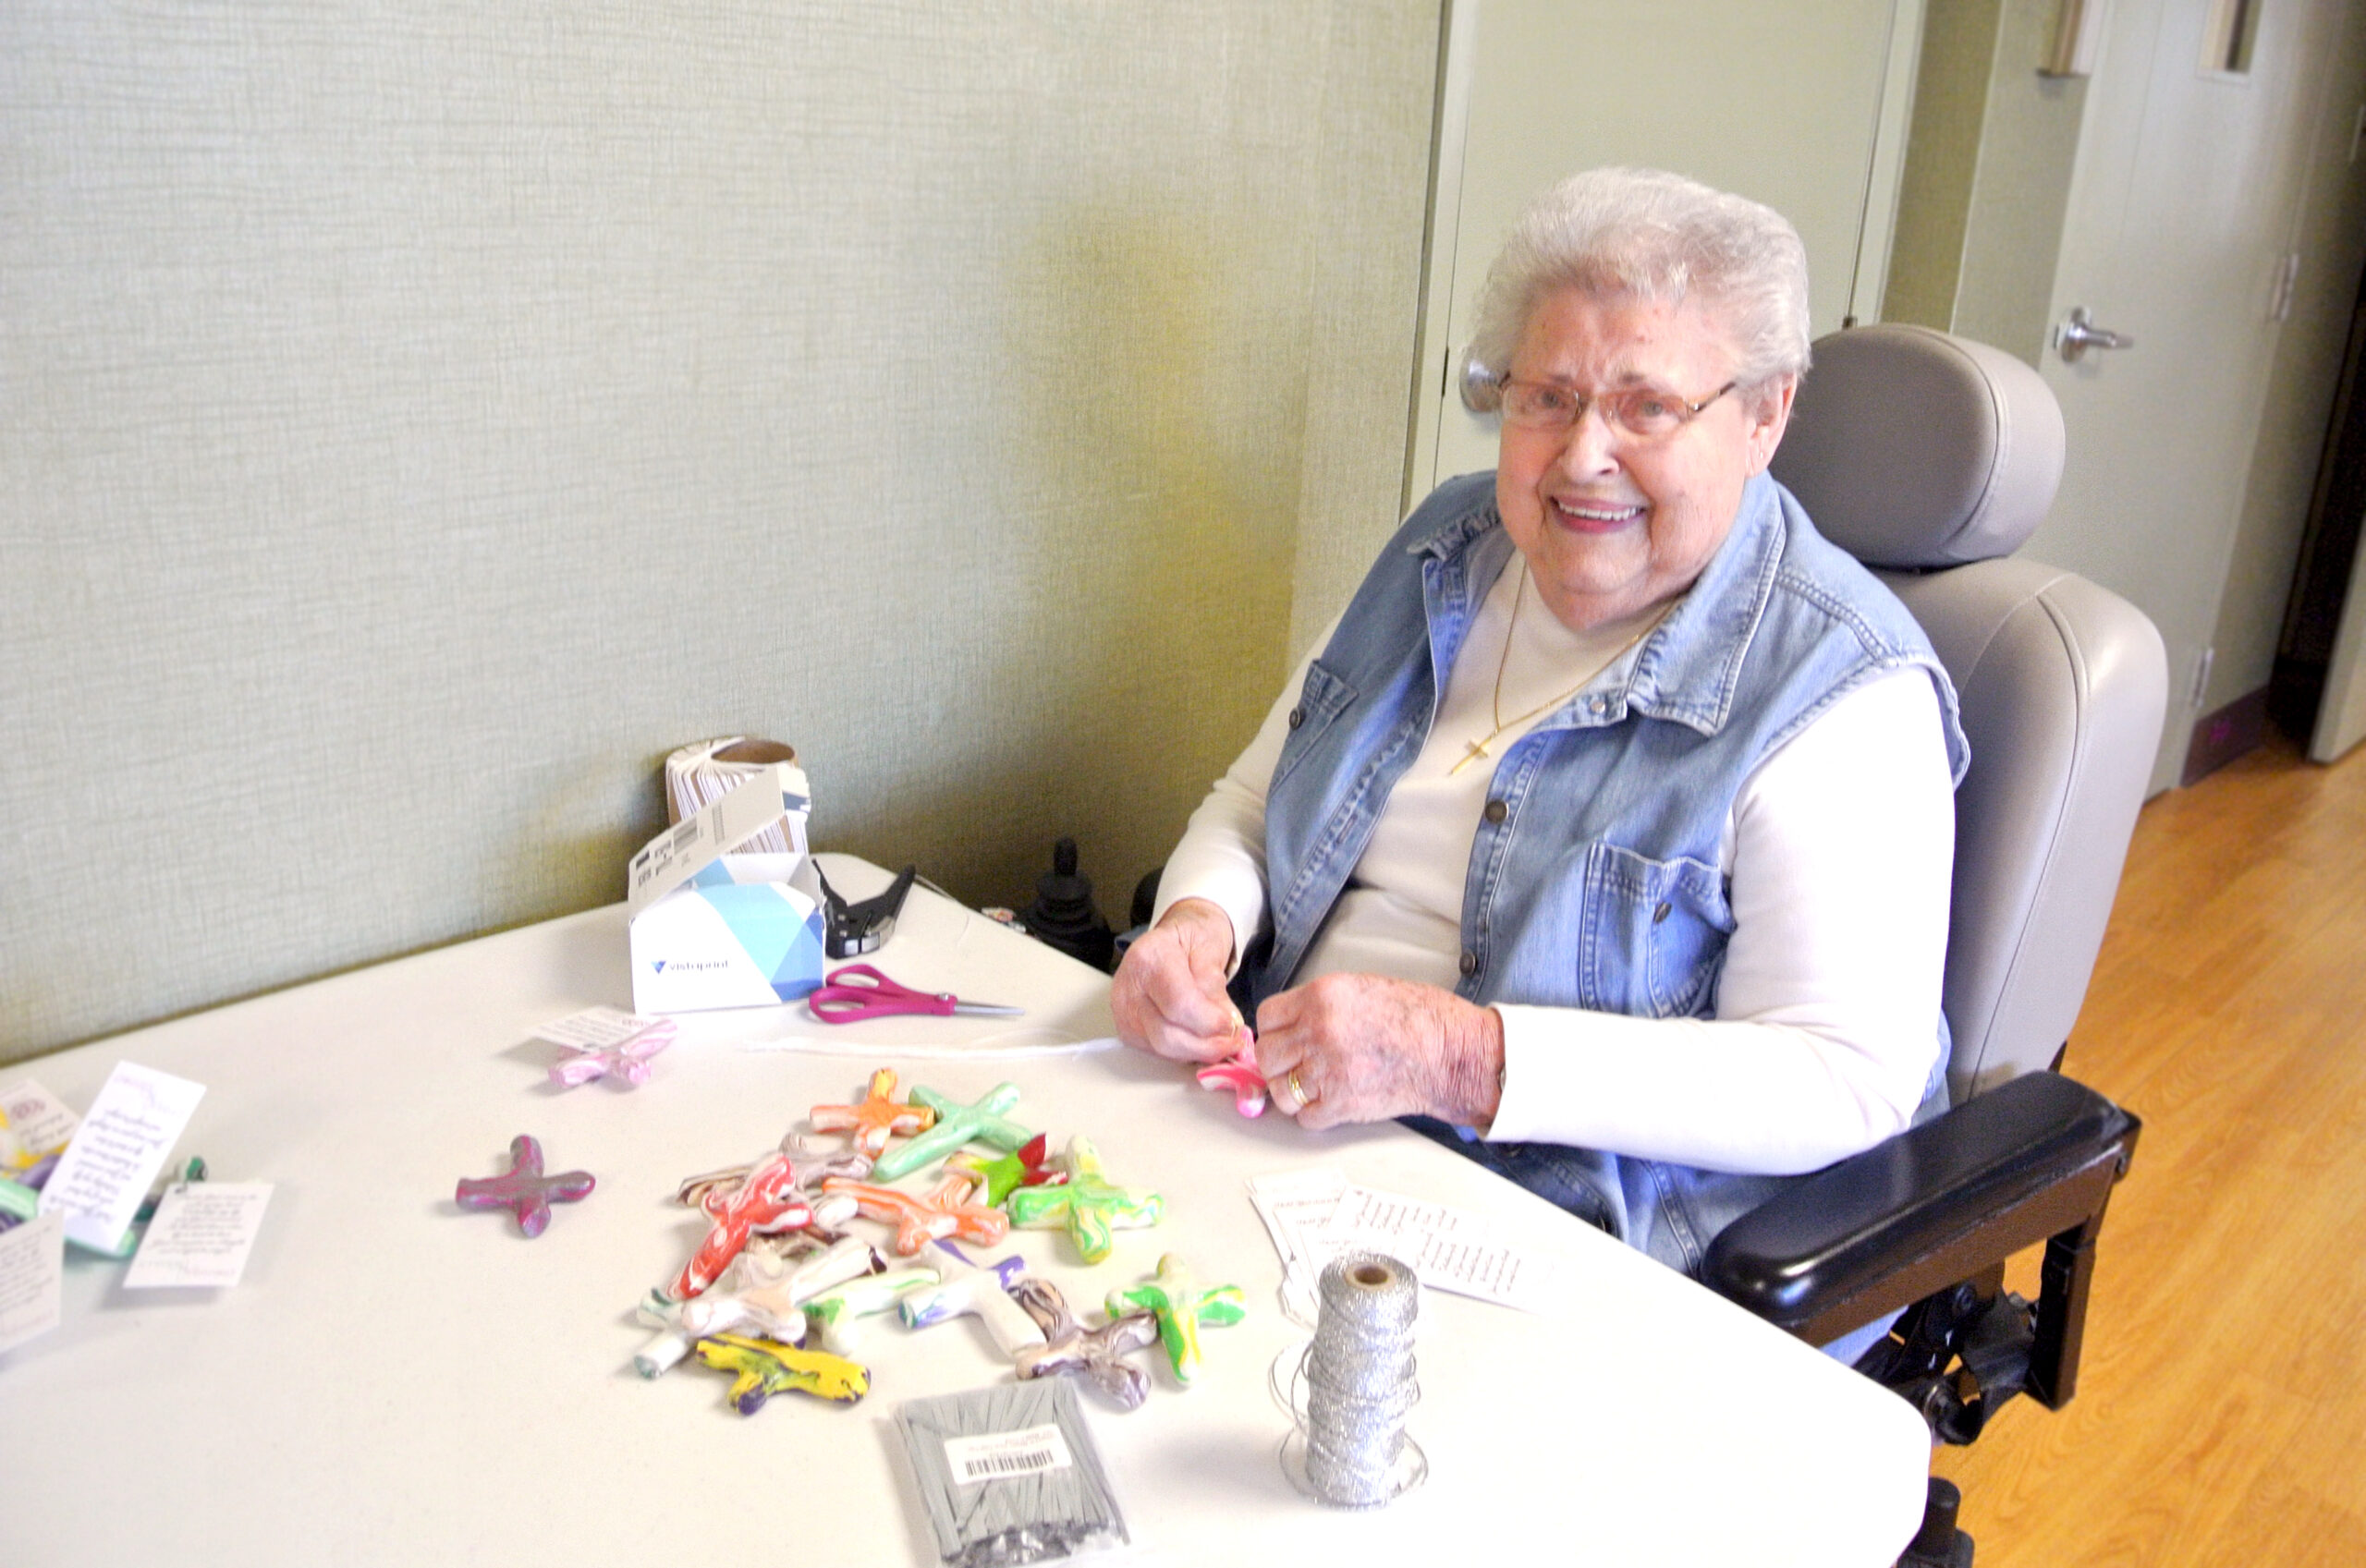 Perry Lutheran Home resident Virginia works on attaching tags with a Christian message to the prayer crosses. Used with permission / Perry Lutheran Home